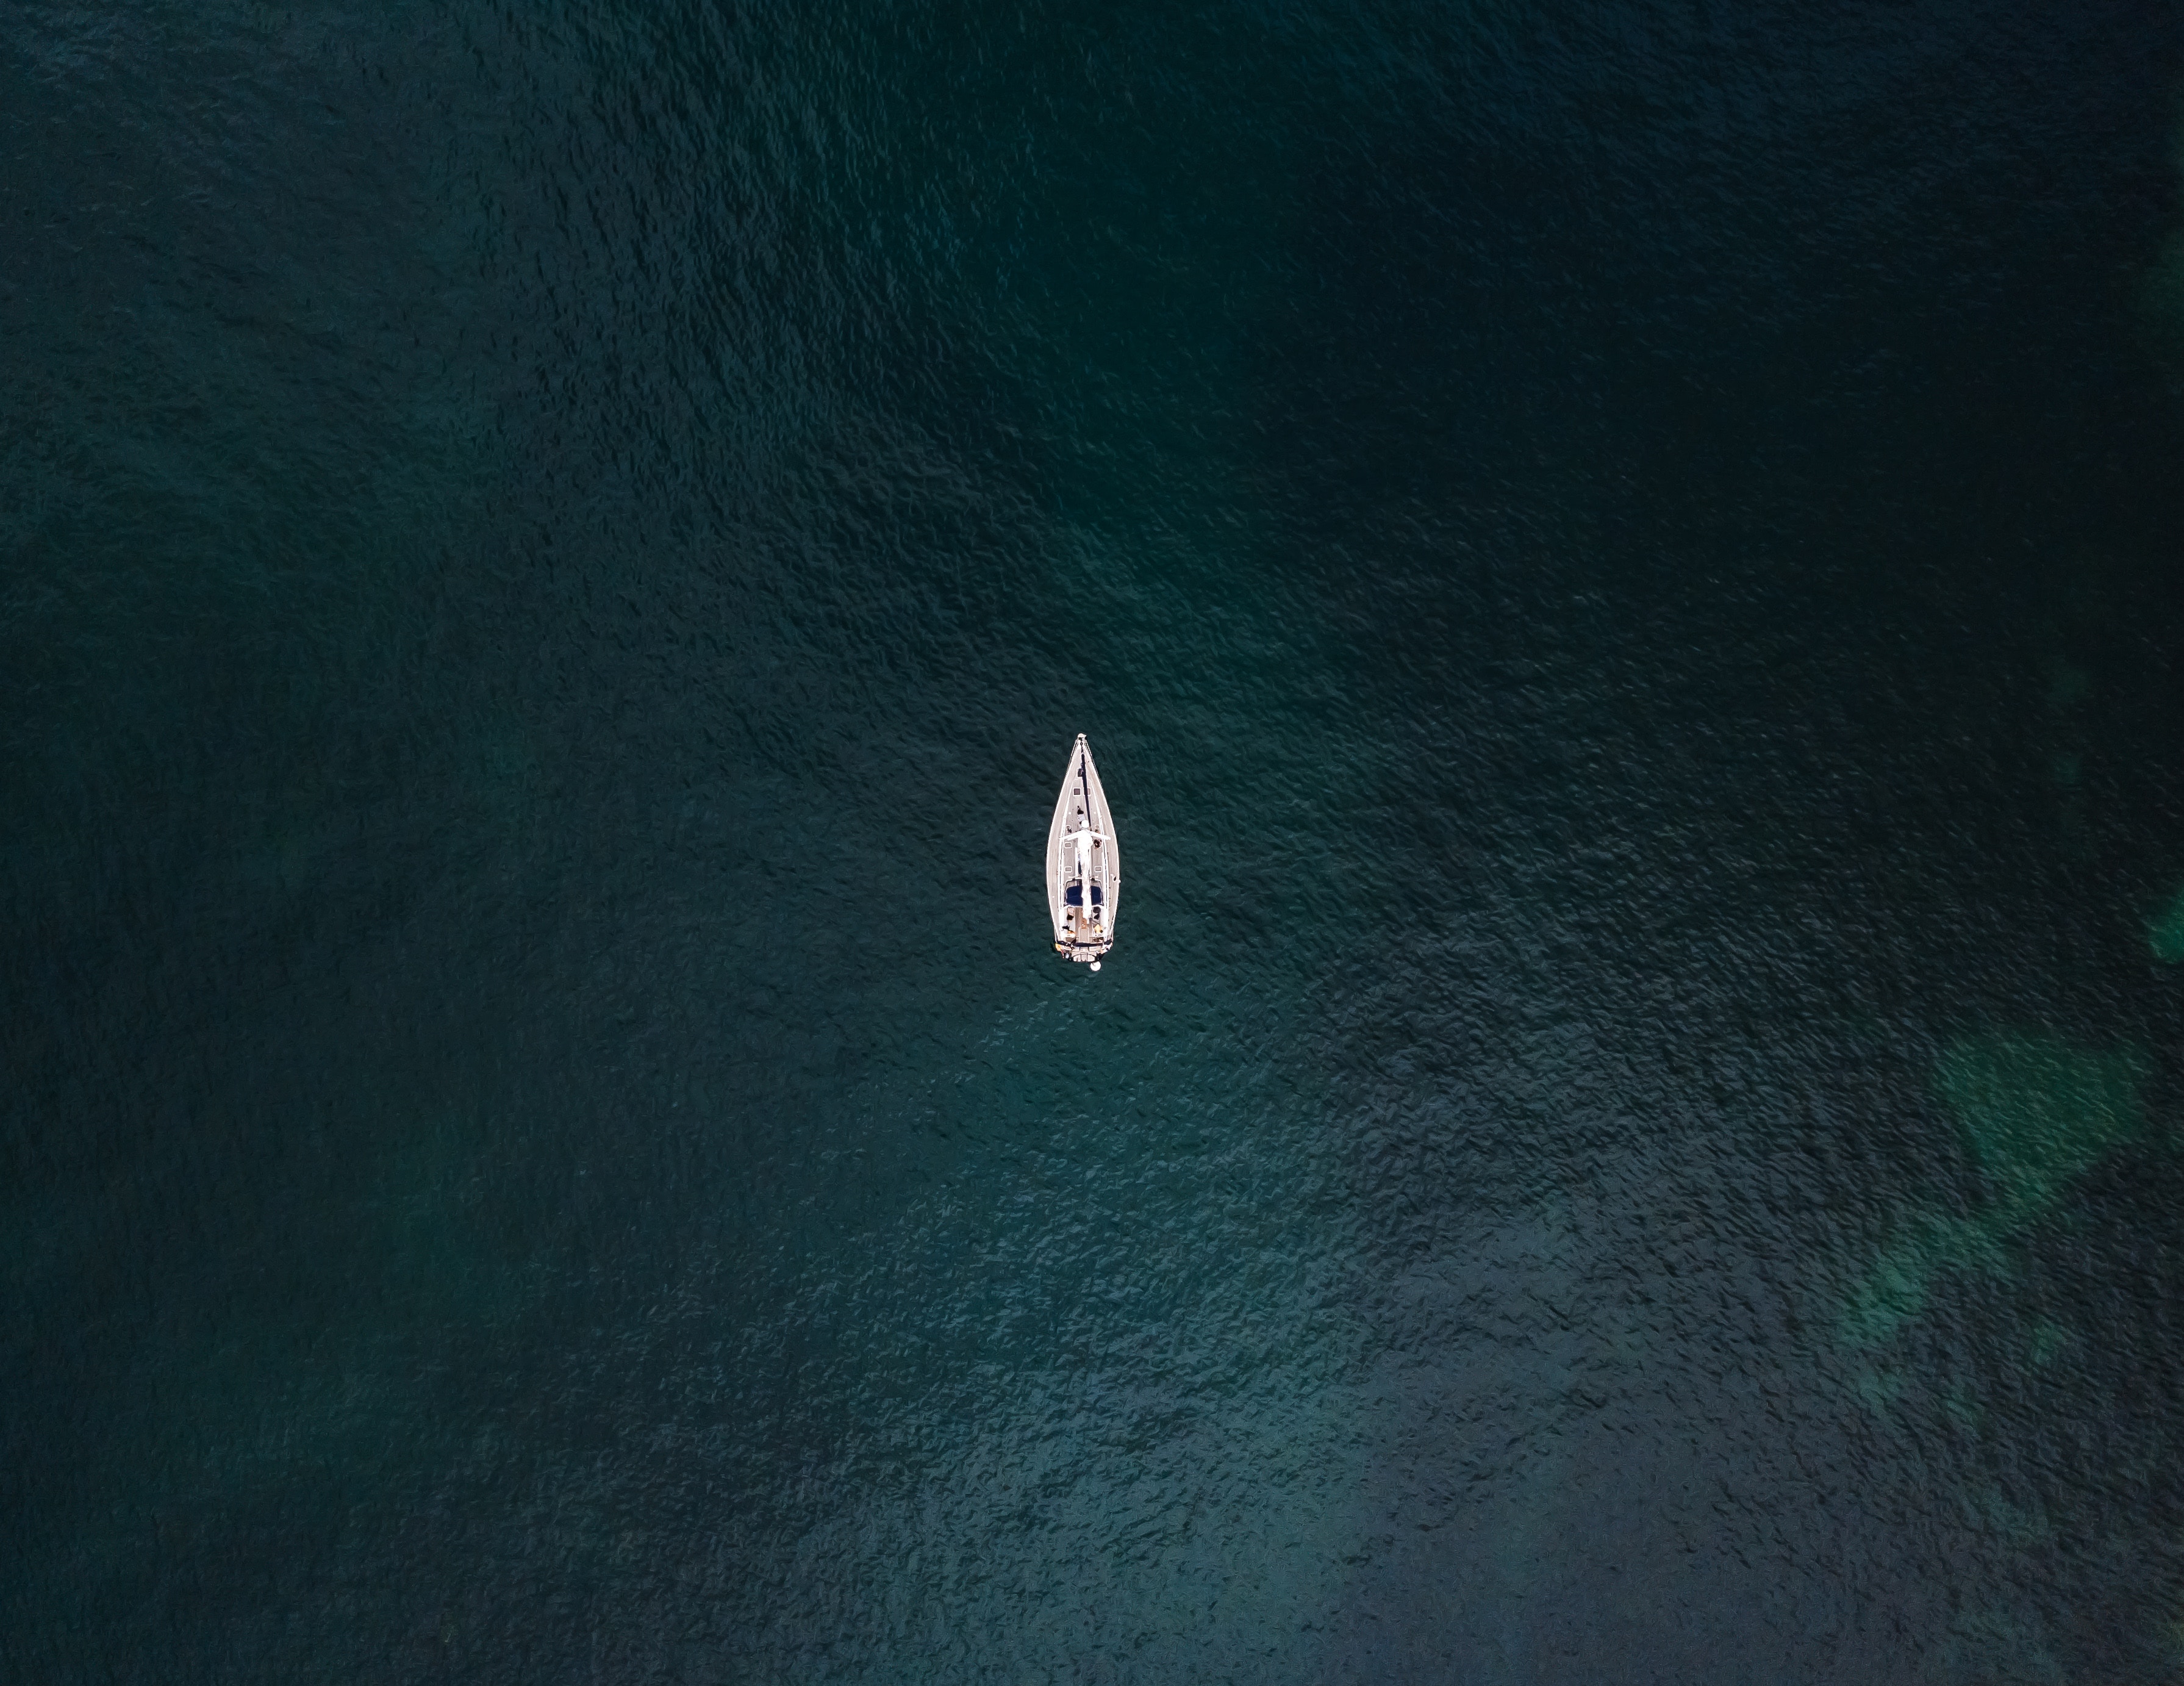 surface, yacht, water, sea, view from above, miscellanea, miscellaneous